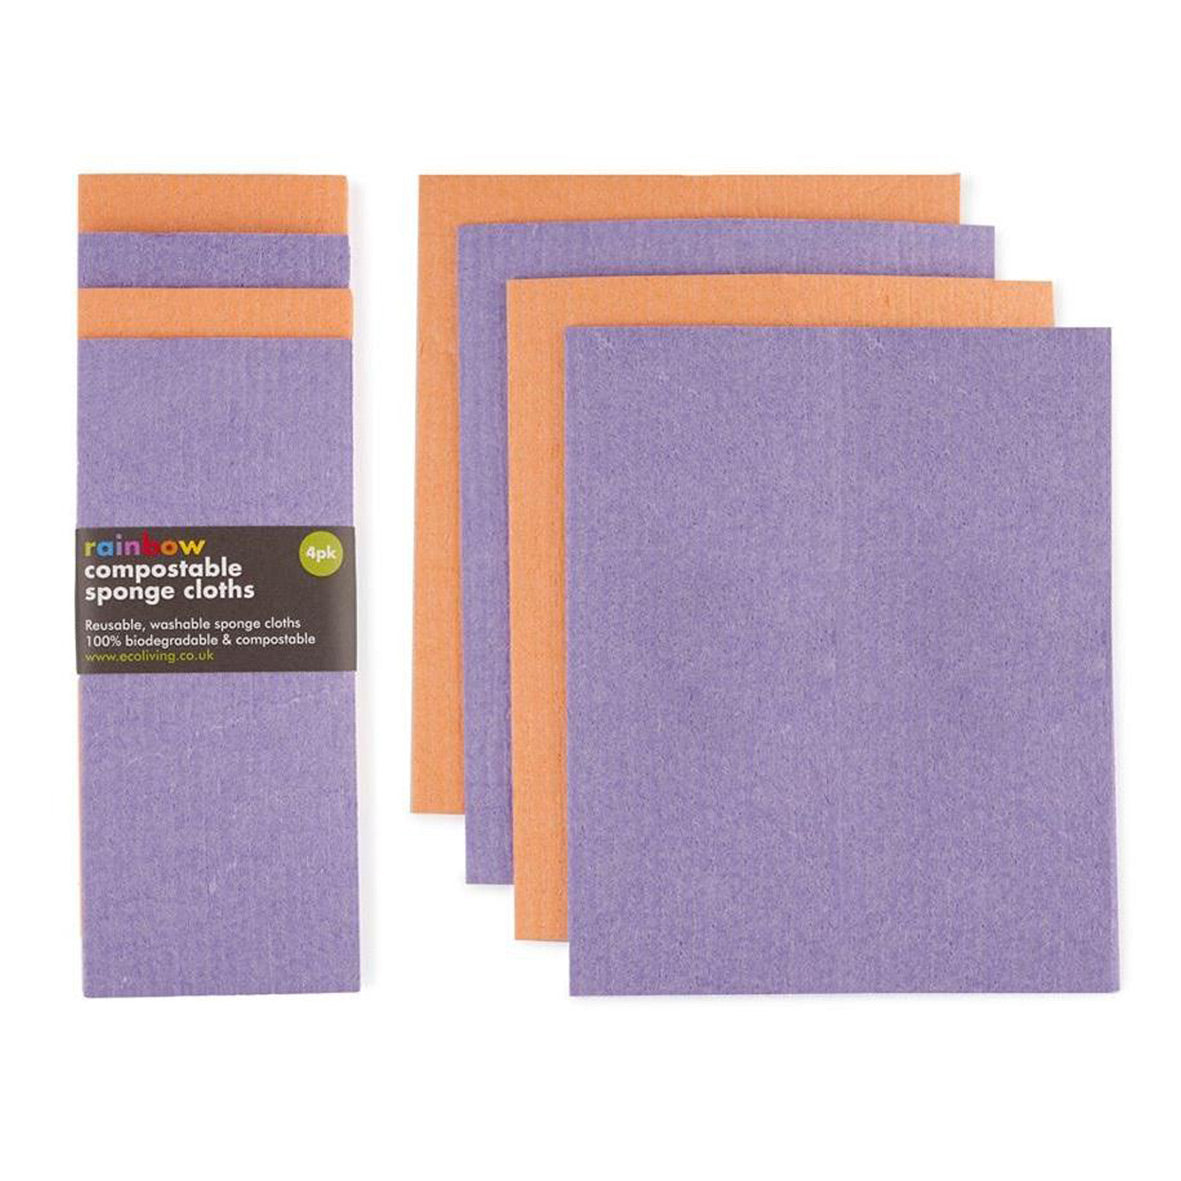 EcoLiving Compostable Sponge Cleaning Cloth Rainbow Bright 4 pack